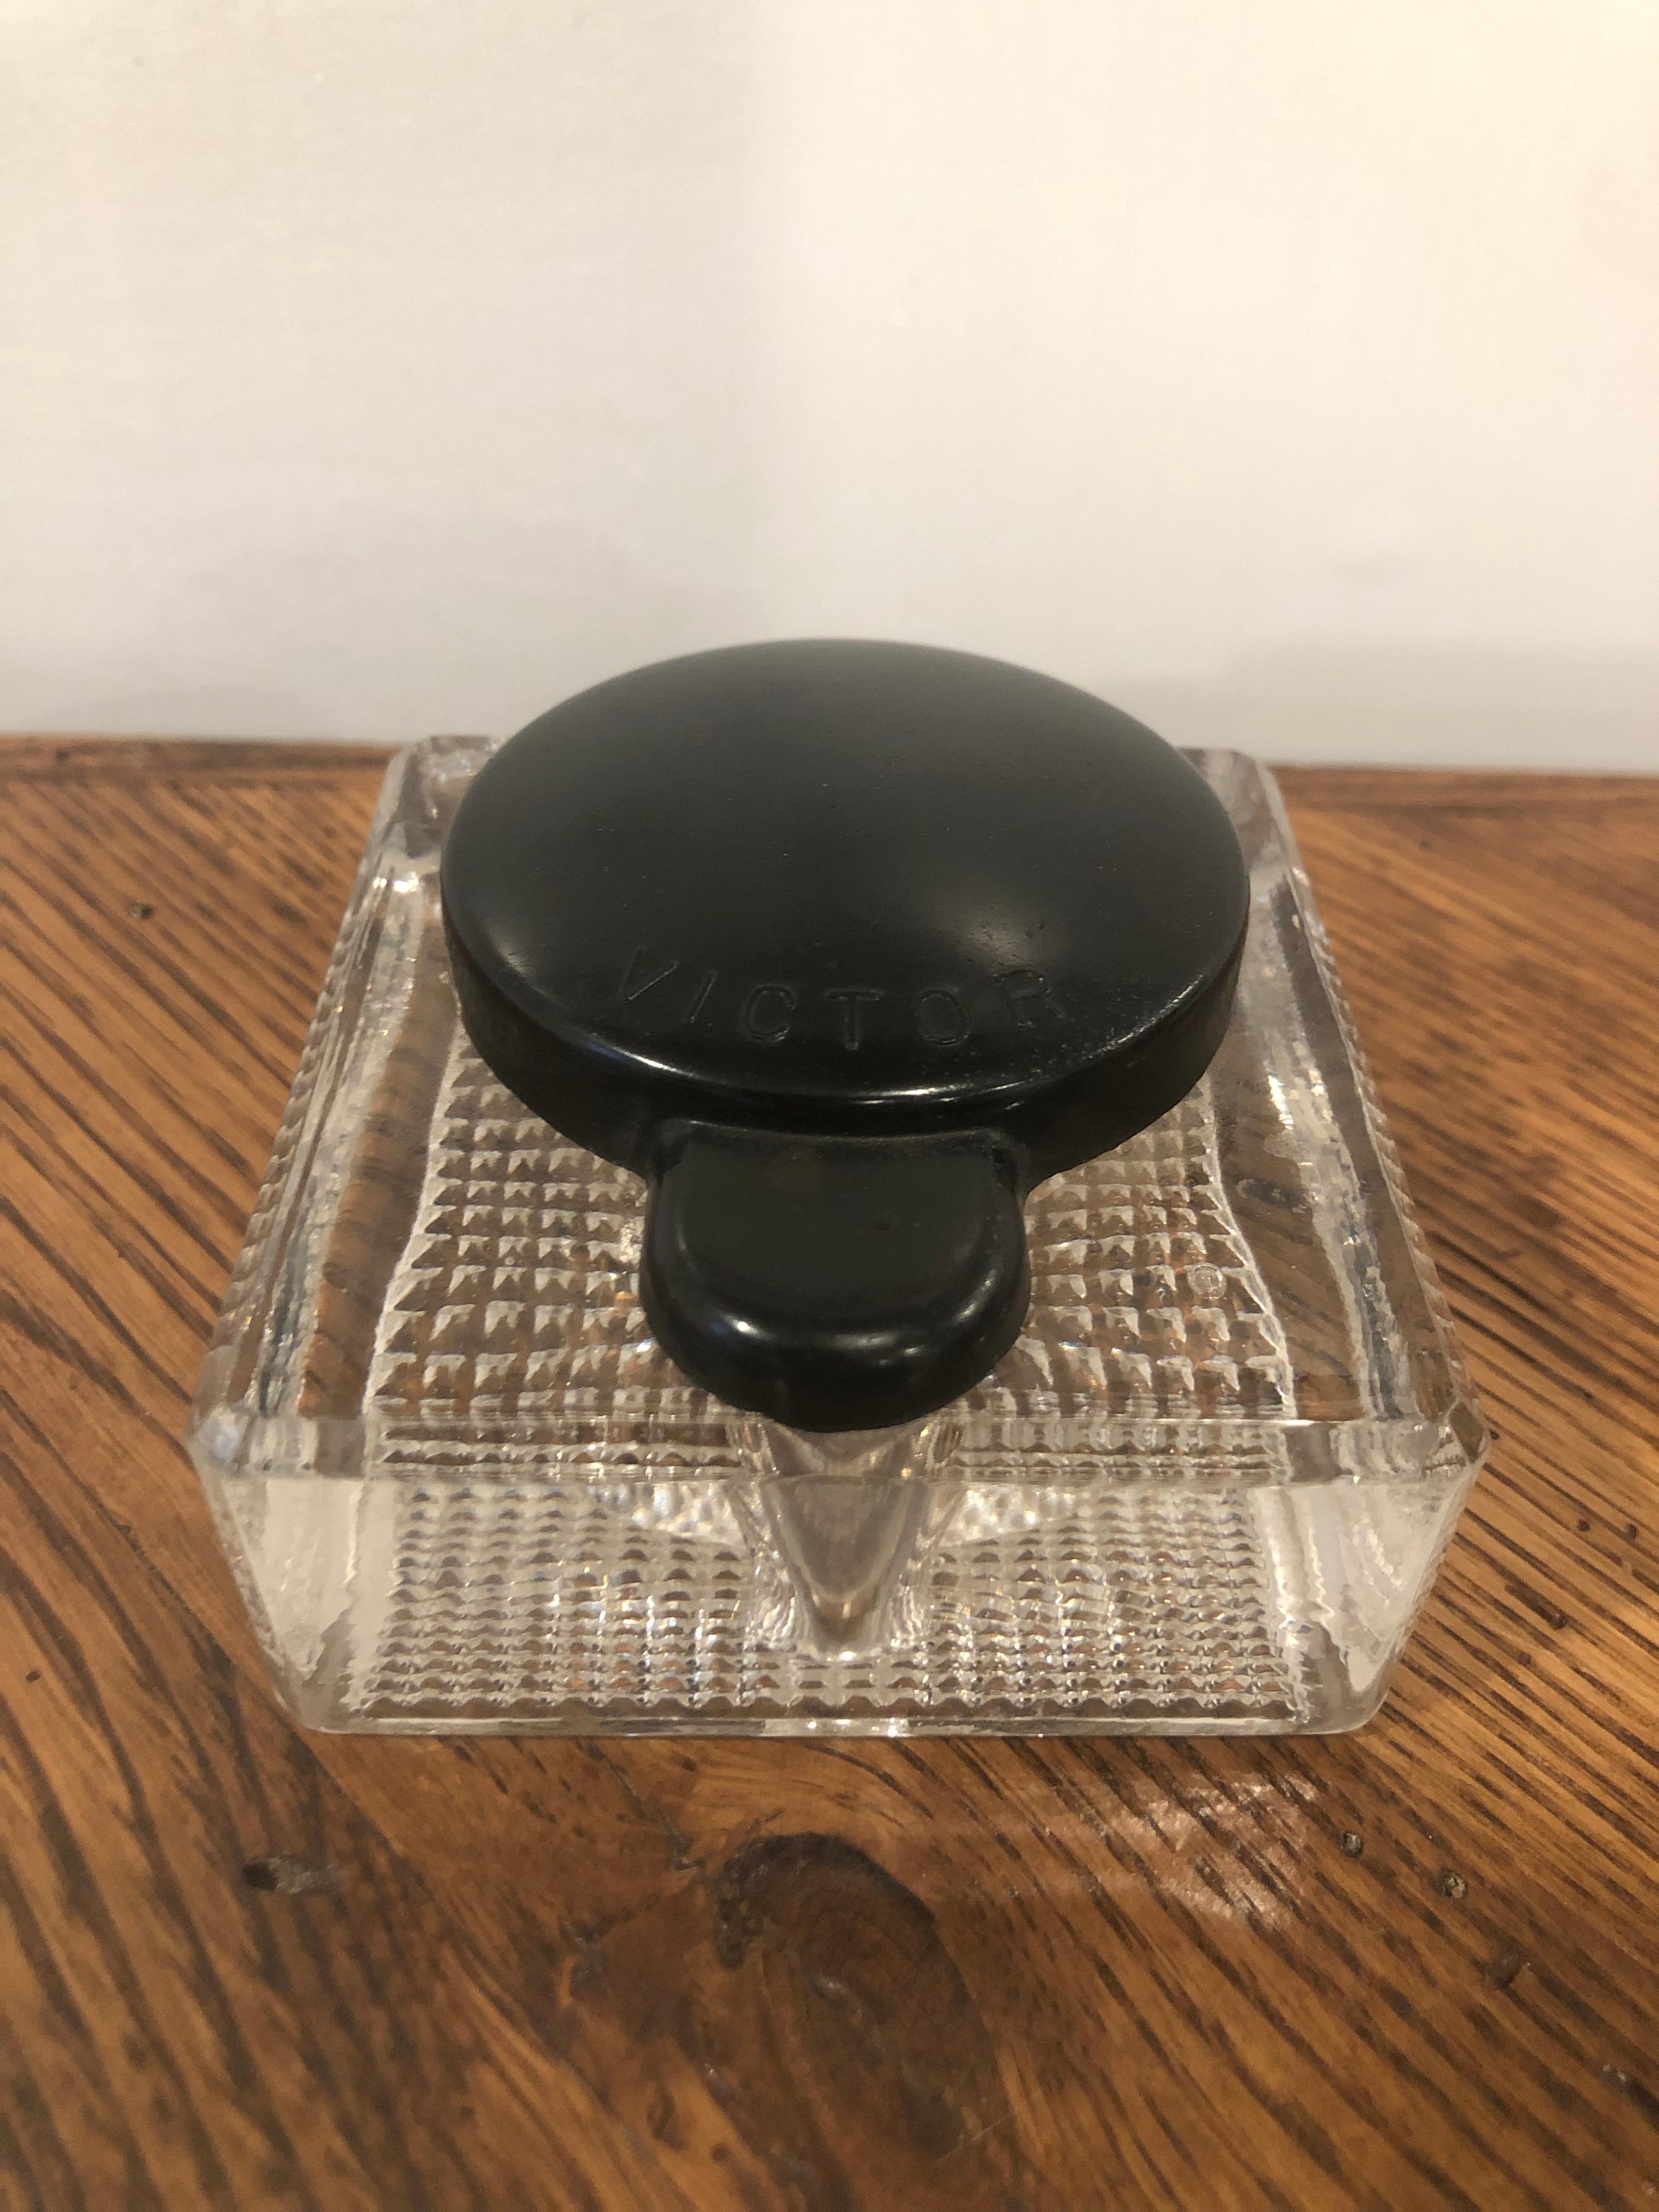 American pressed glass inkwell square base with a black top rounded edges stamped VICTOR. This inkwell has a great look and unusual shape circa 1880.